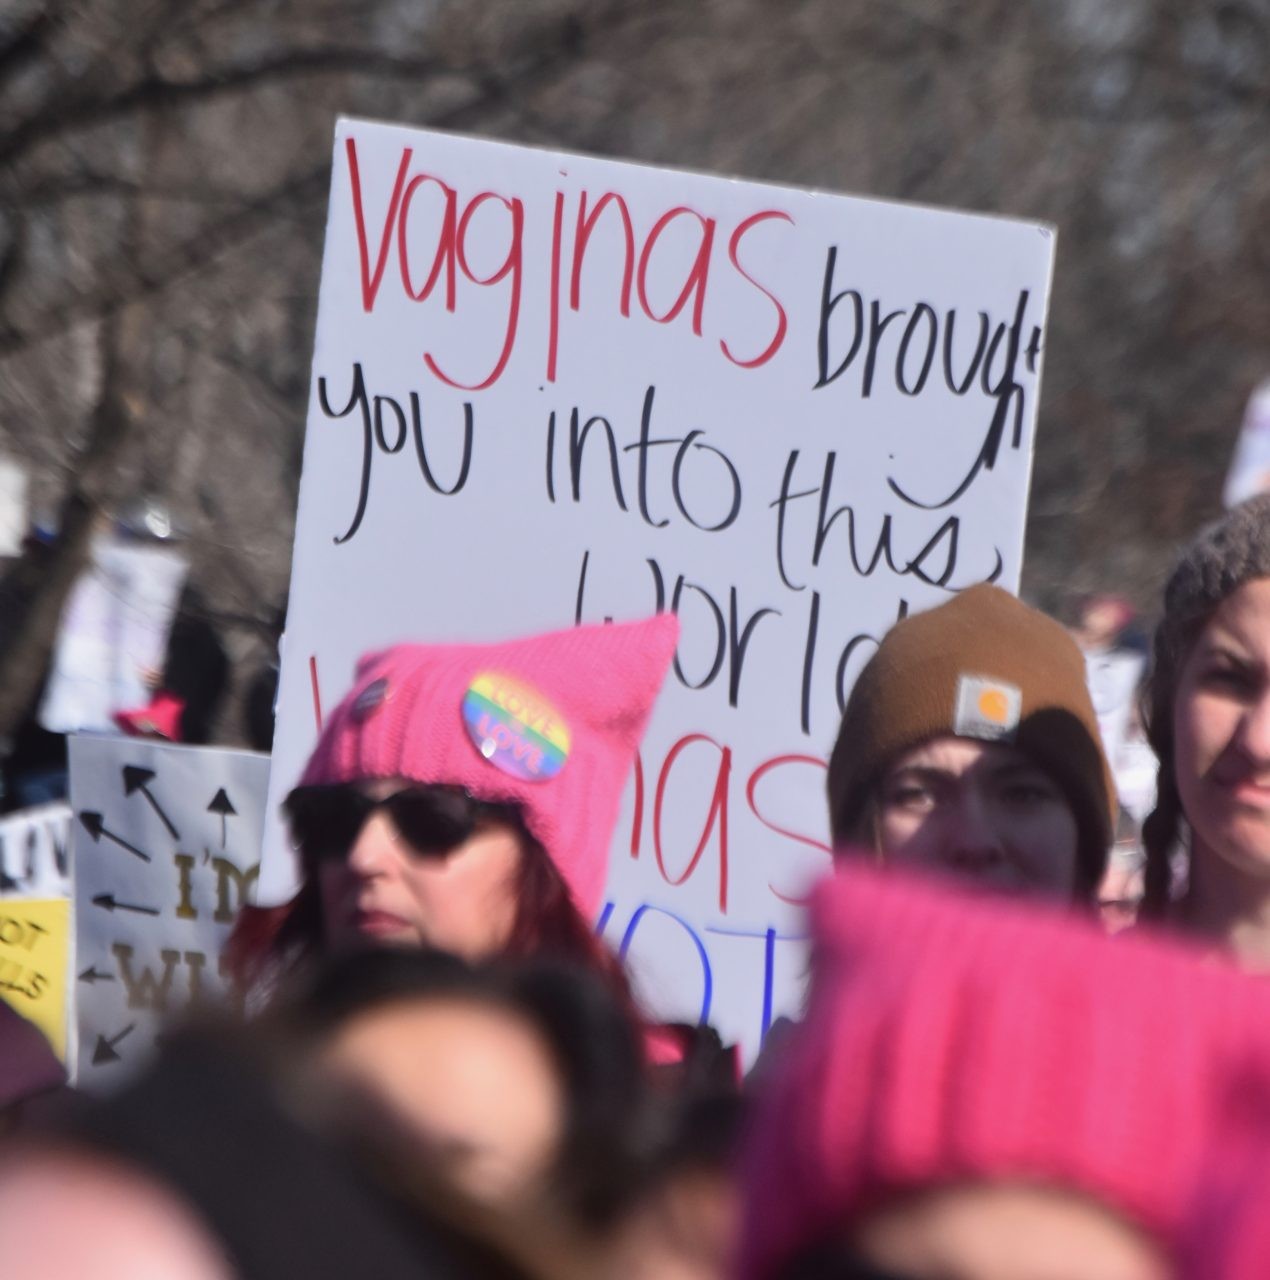 PHOTOS: Top 21 Signs From the Angry Women’s March in D.C.